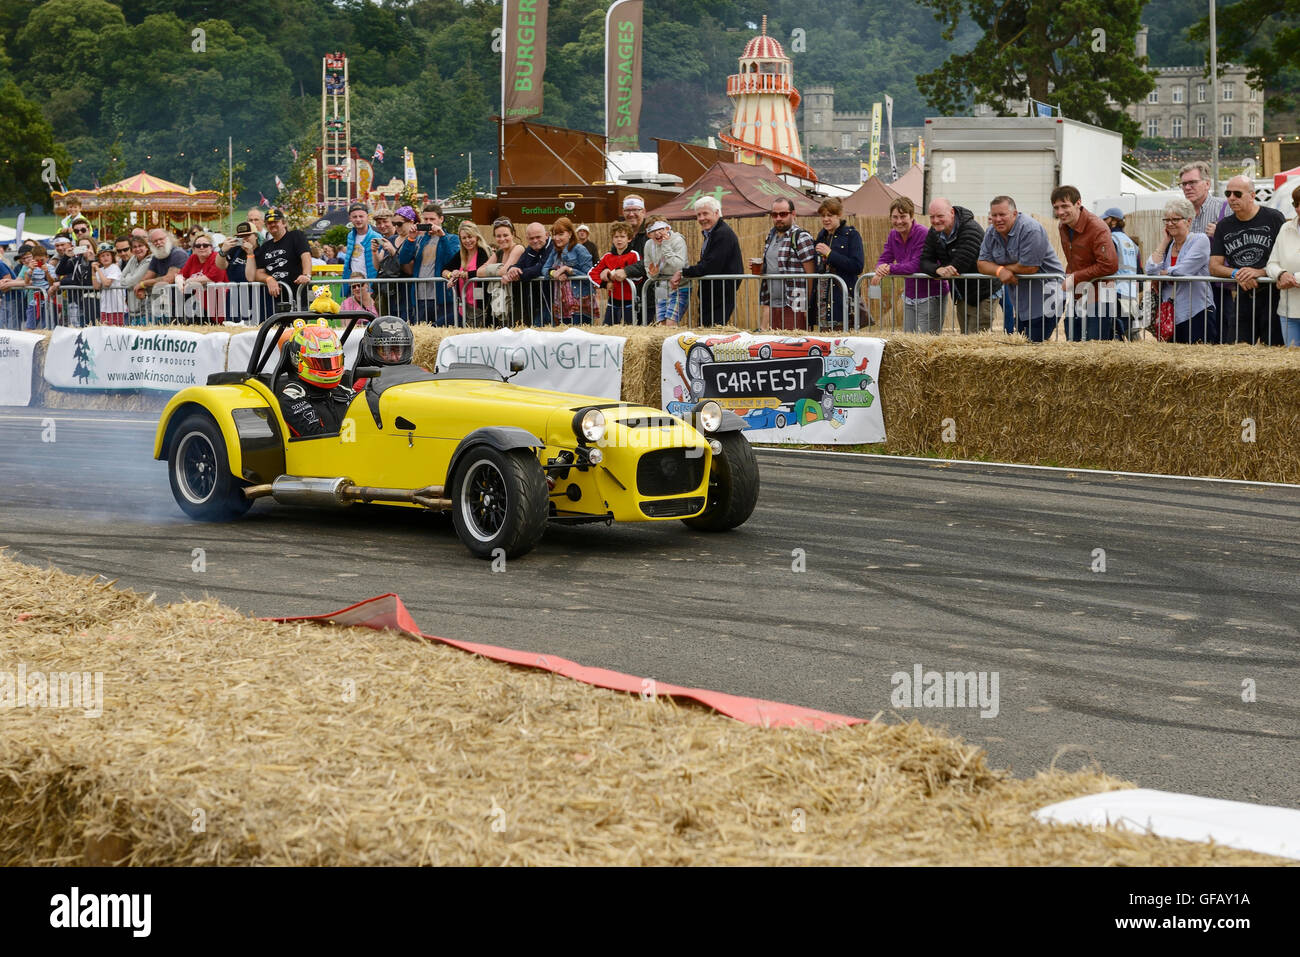 Carfest North, Bolesworth, Cheshire, UK. 30th July 2016. A Caterham on the track. The event is the brainchild of Chris Evans and features 3 days of cars, music and entertainment with profits being donated to the charity Children in Need. Andrew Paterson/Alamy Live News Stock Photo